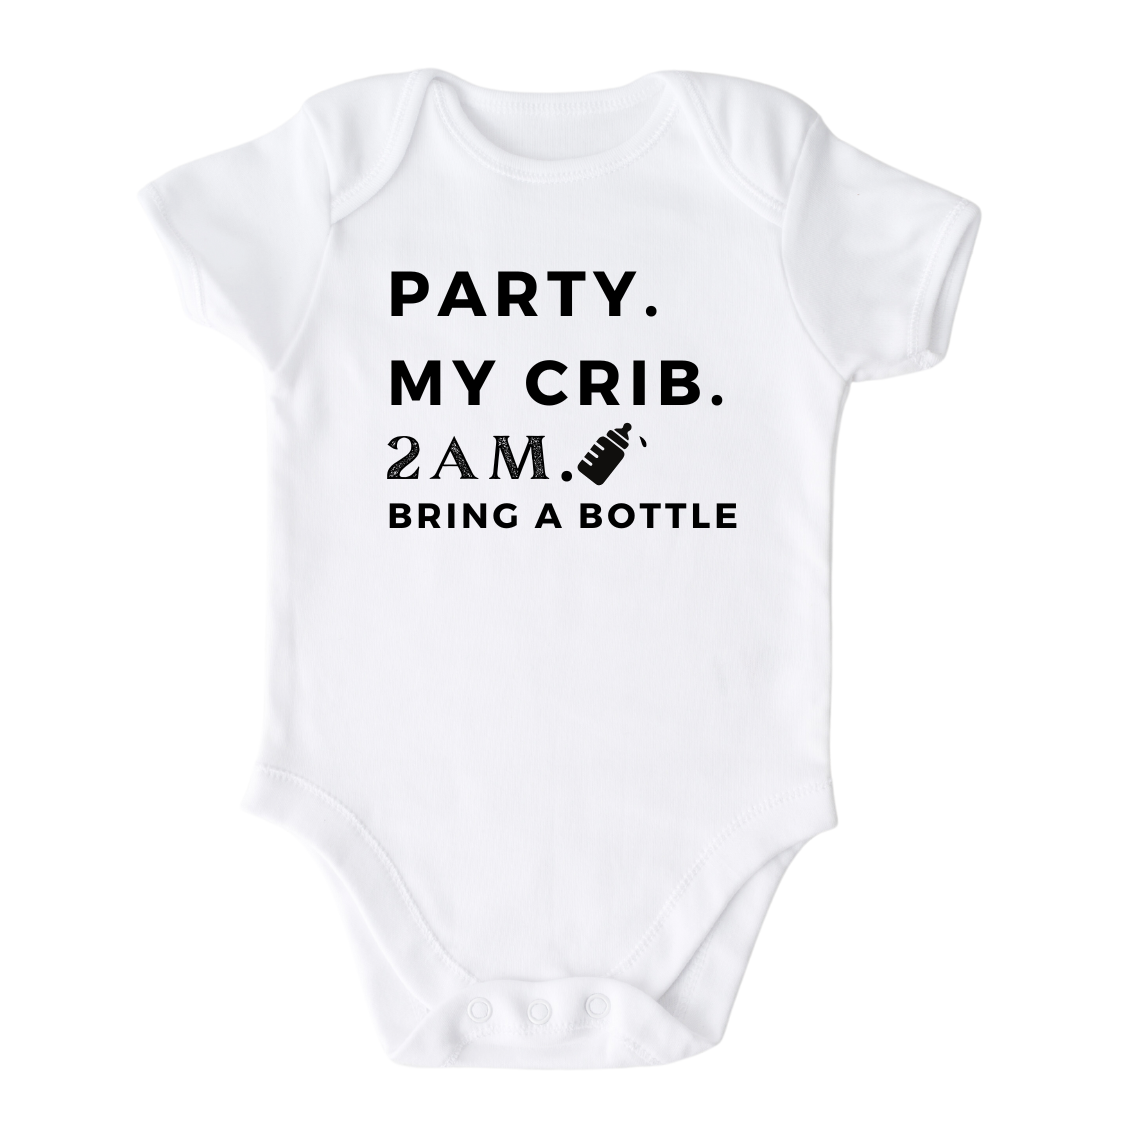 Cute Bodysuits for Baby